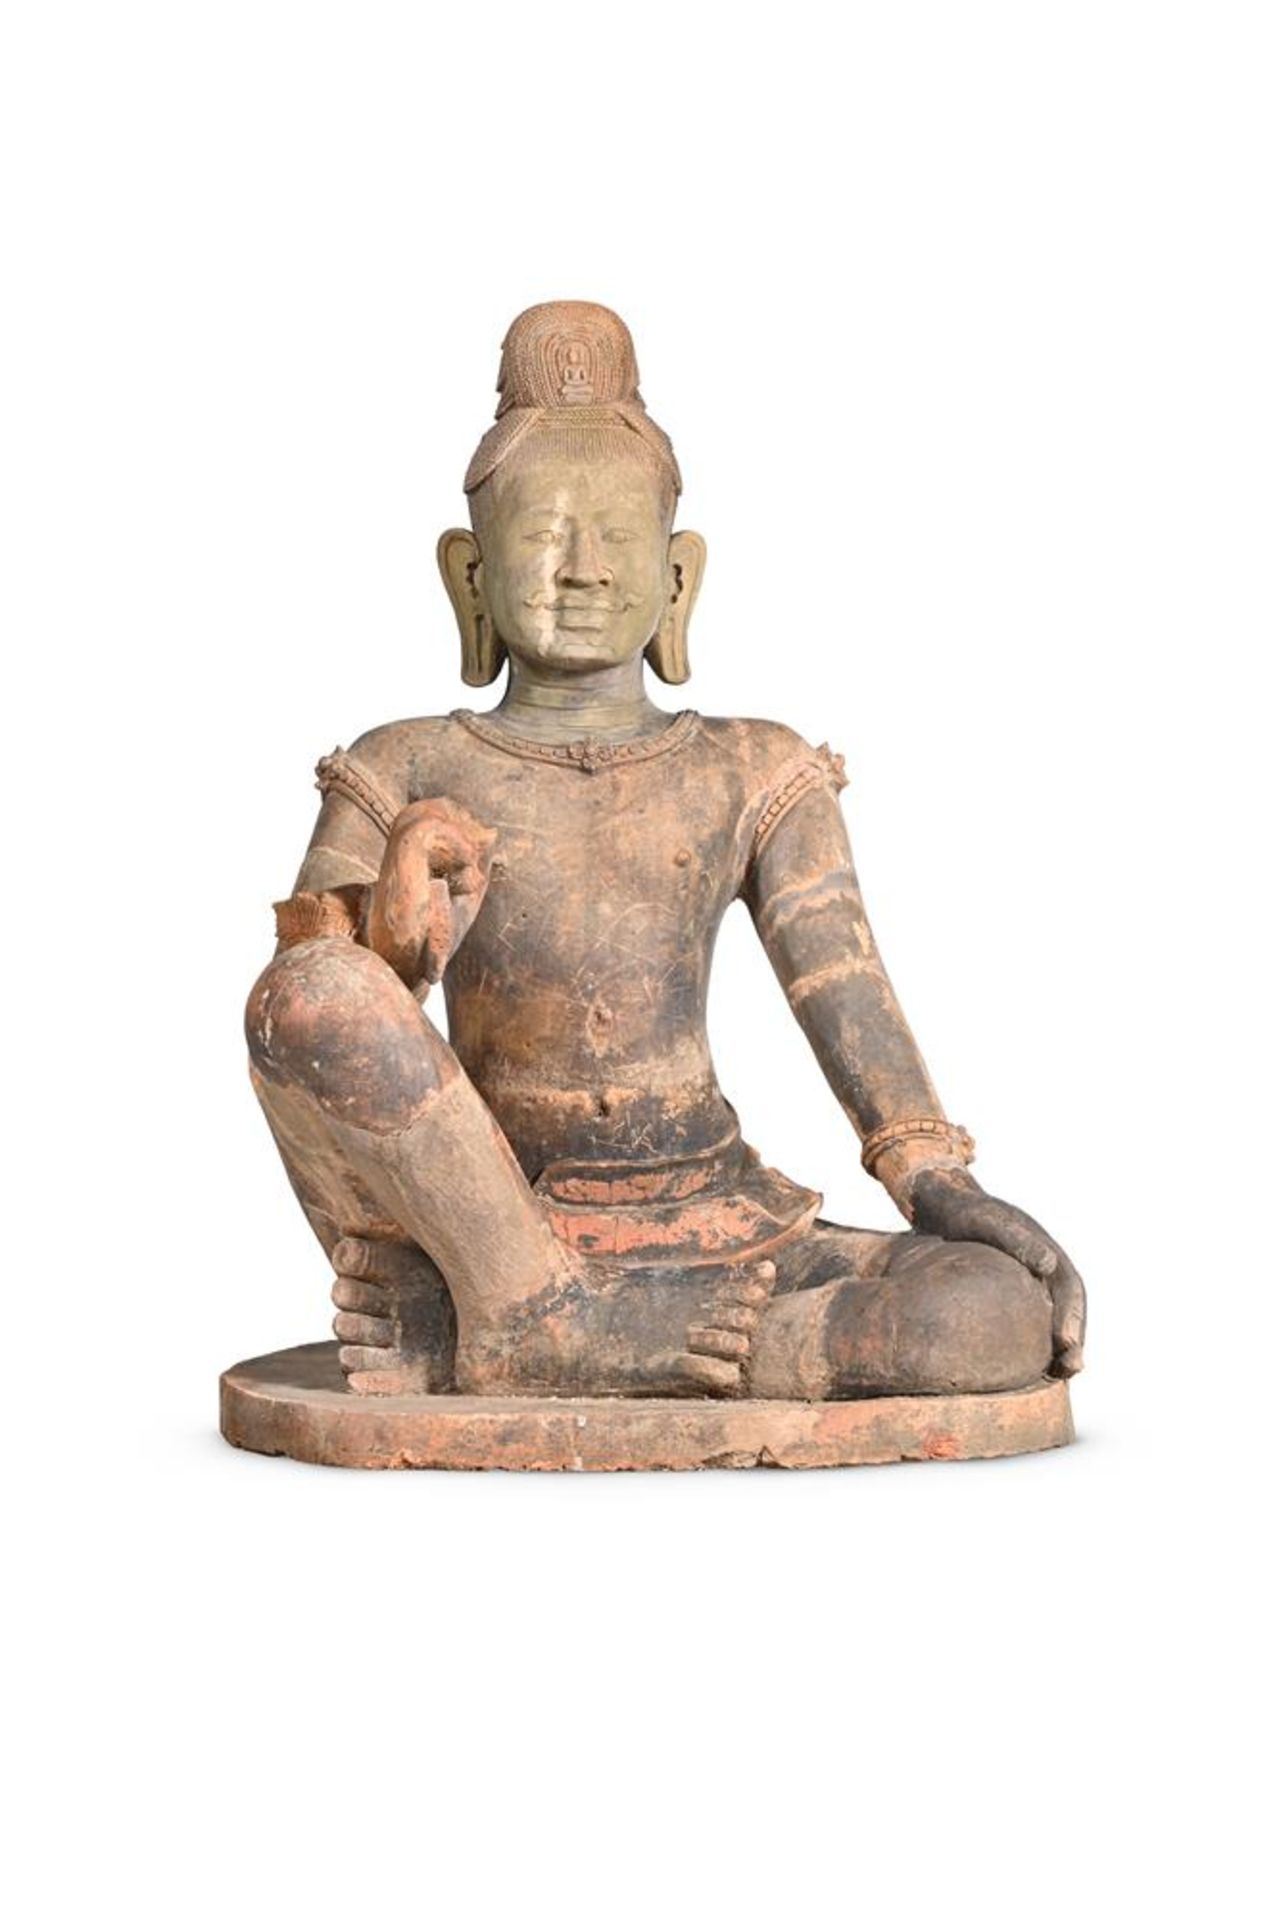 A LARGE TERRACOTTA SEATED FIGURE OF A MALE DEITY, PROBABLY 19TH OR EARLY 20TH CENTURY